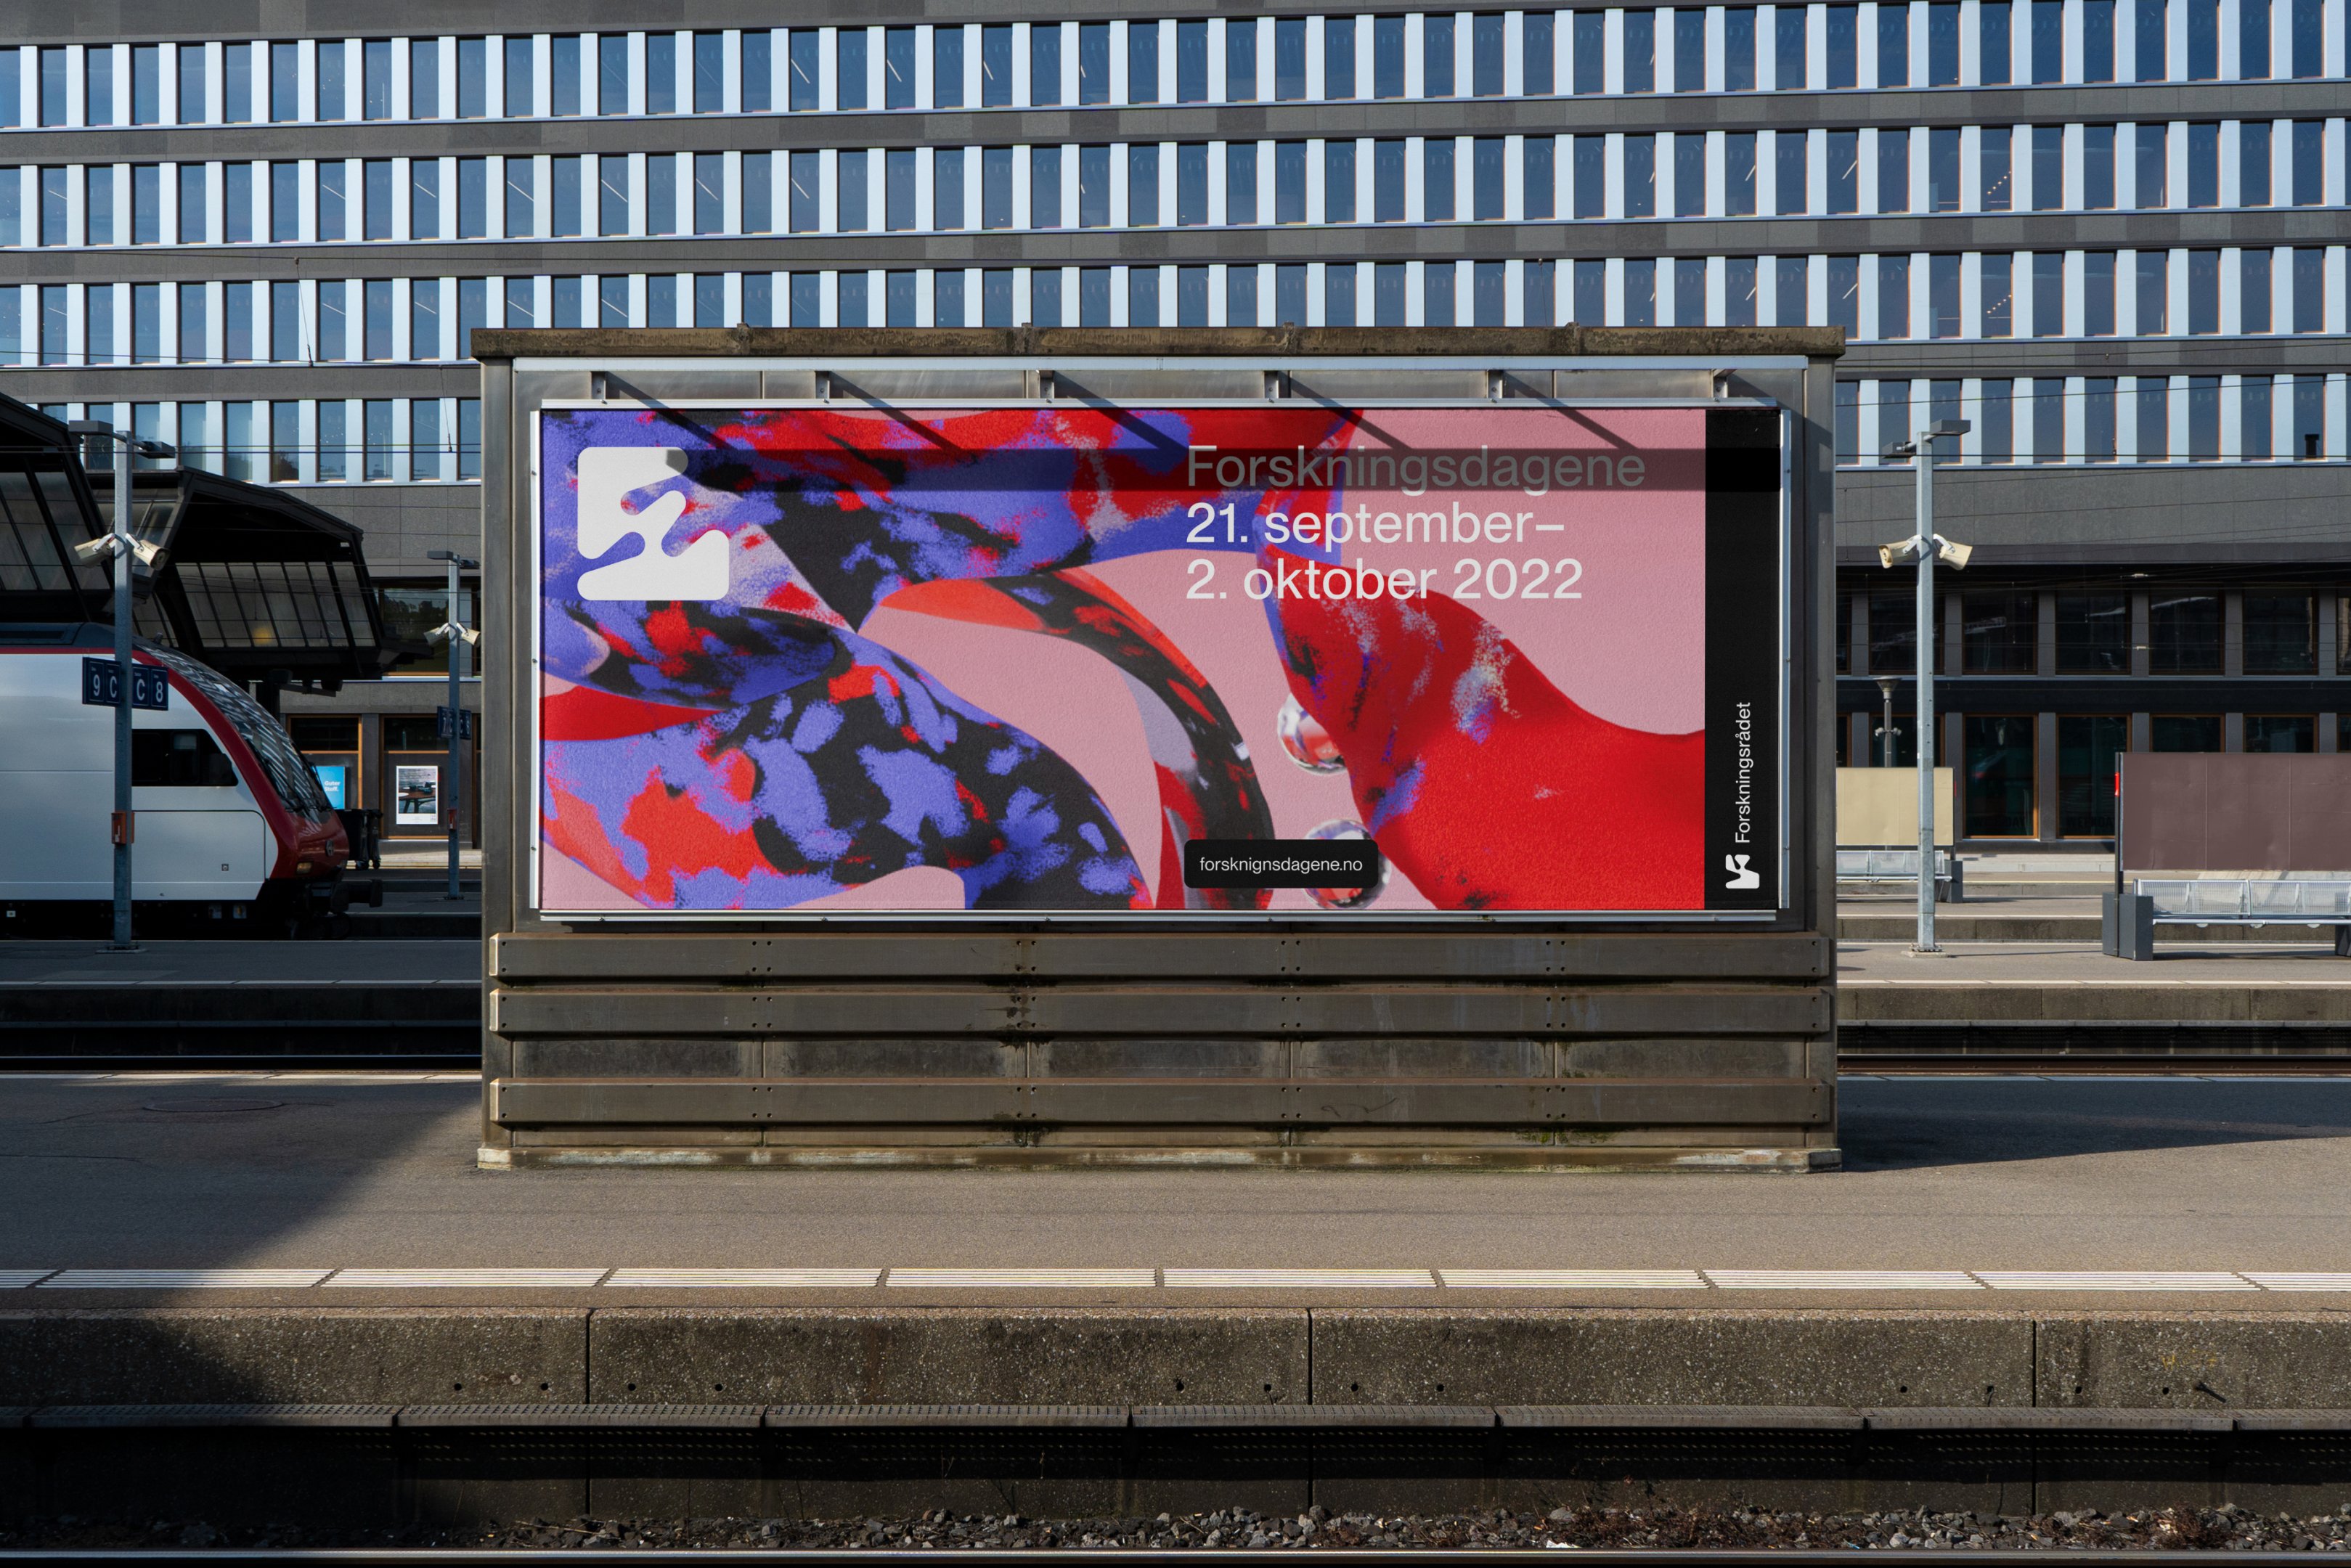 Brand identity and billboard poster design by ANTI for The Norwegian Research Council